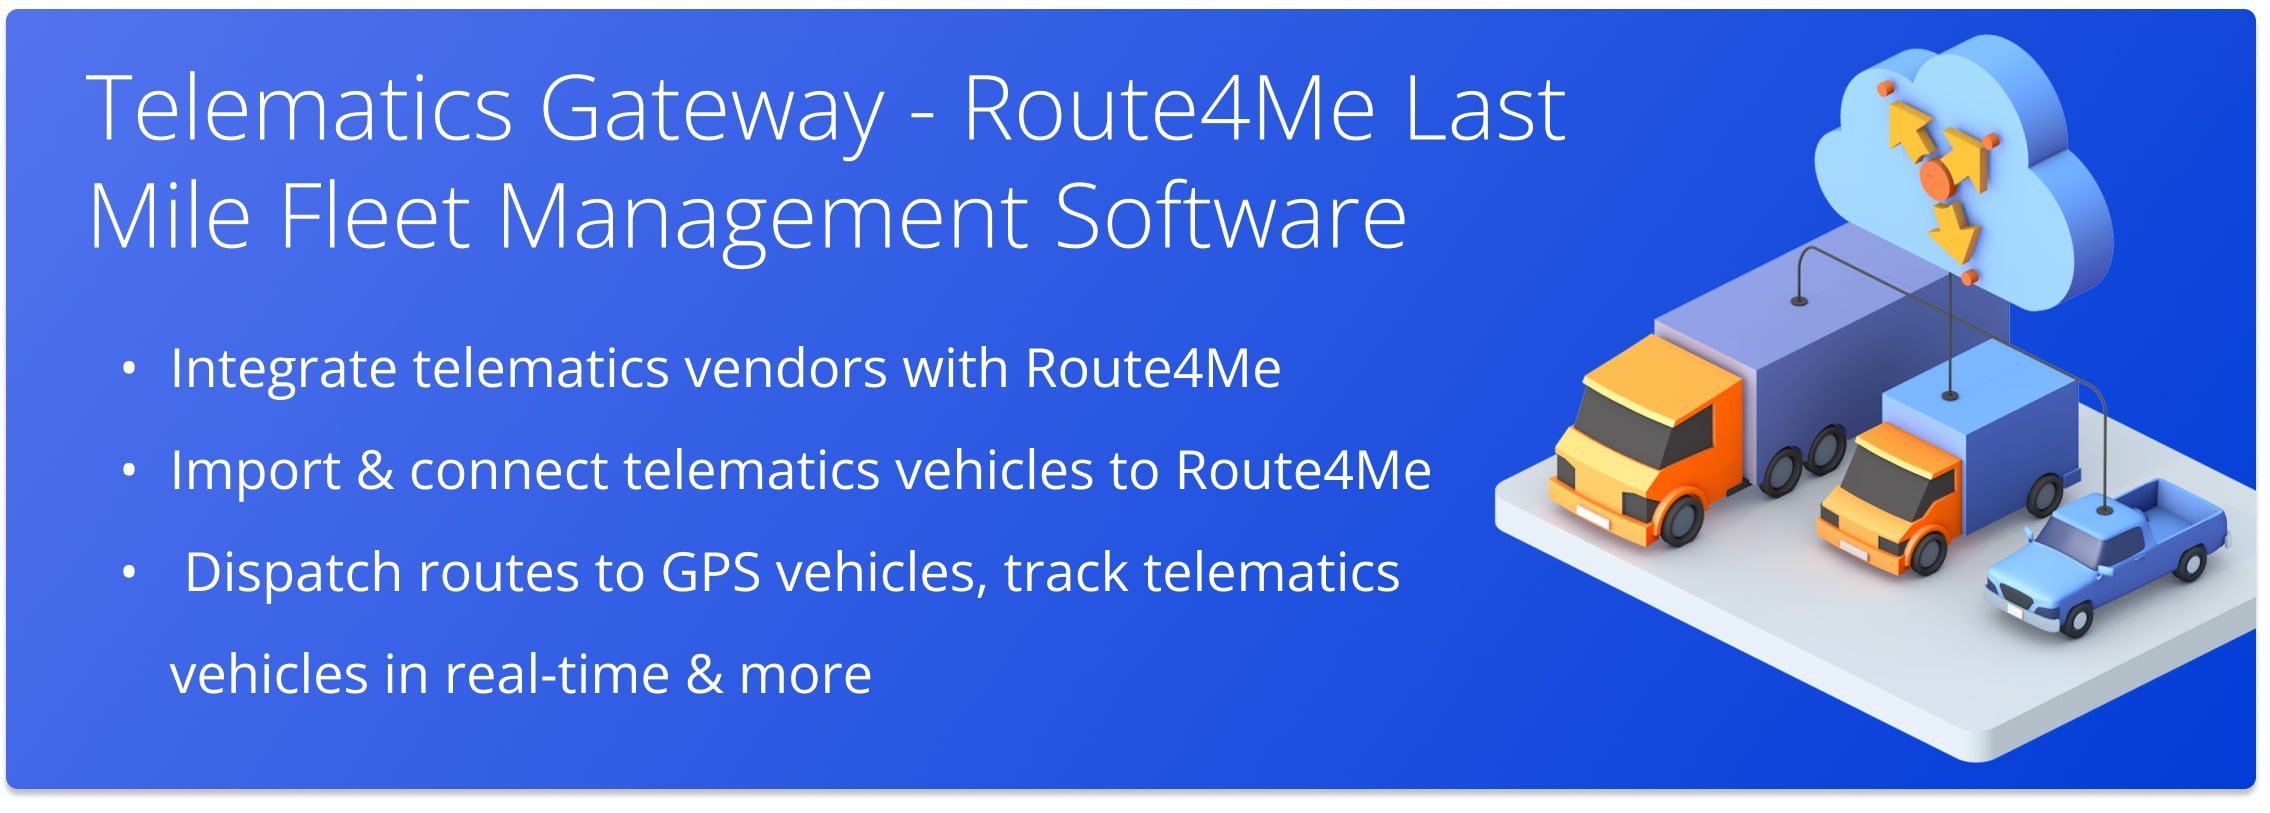 Establish telematics connections with vendors, import and connect telematics vehicles, dispatch routes to GPS vehicles, track telematics vehicles, and more.